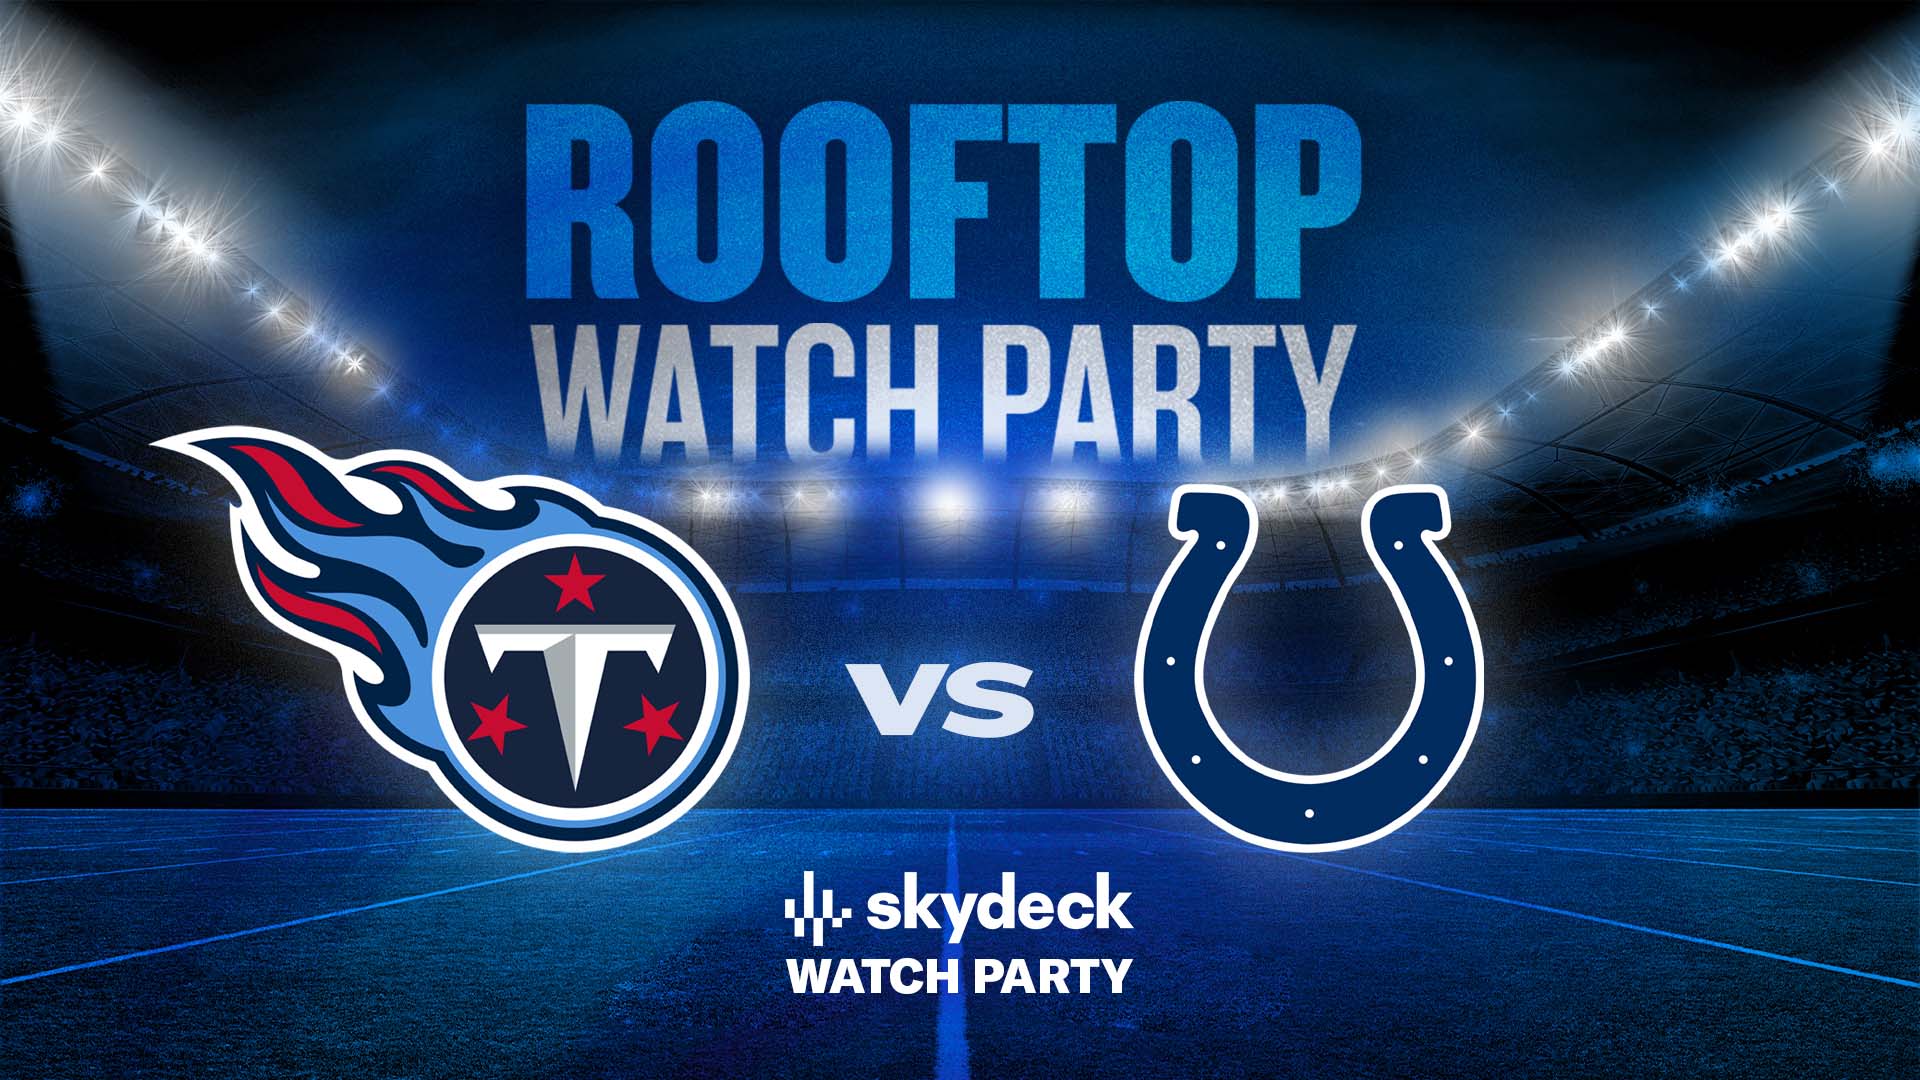 Titans vs. Colts | Skydeck Watch Party - hero